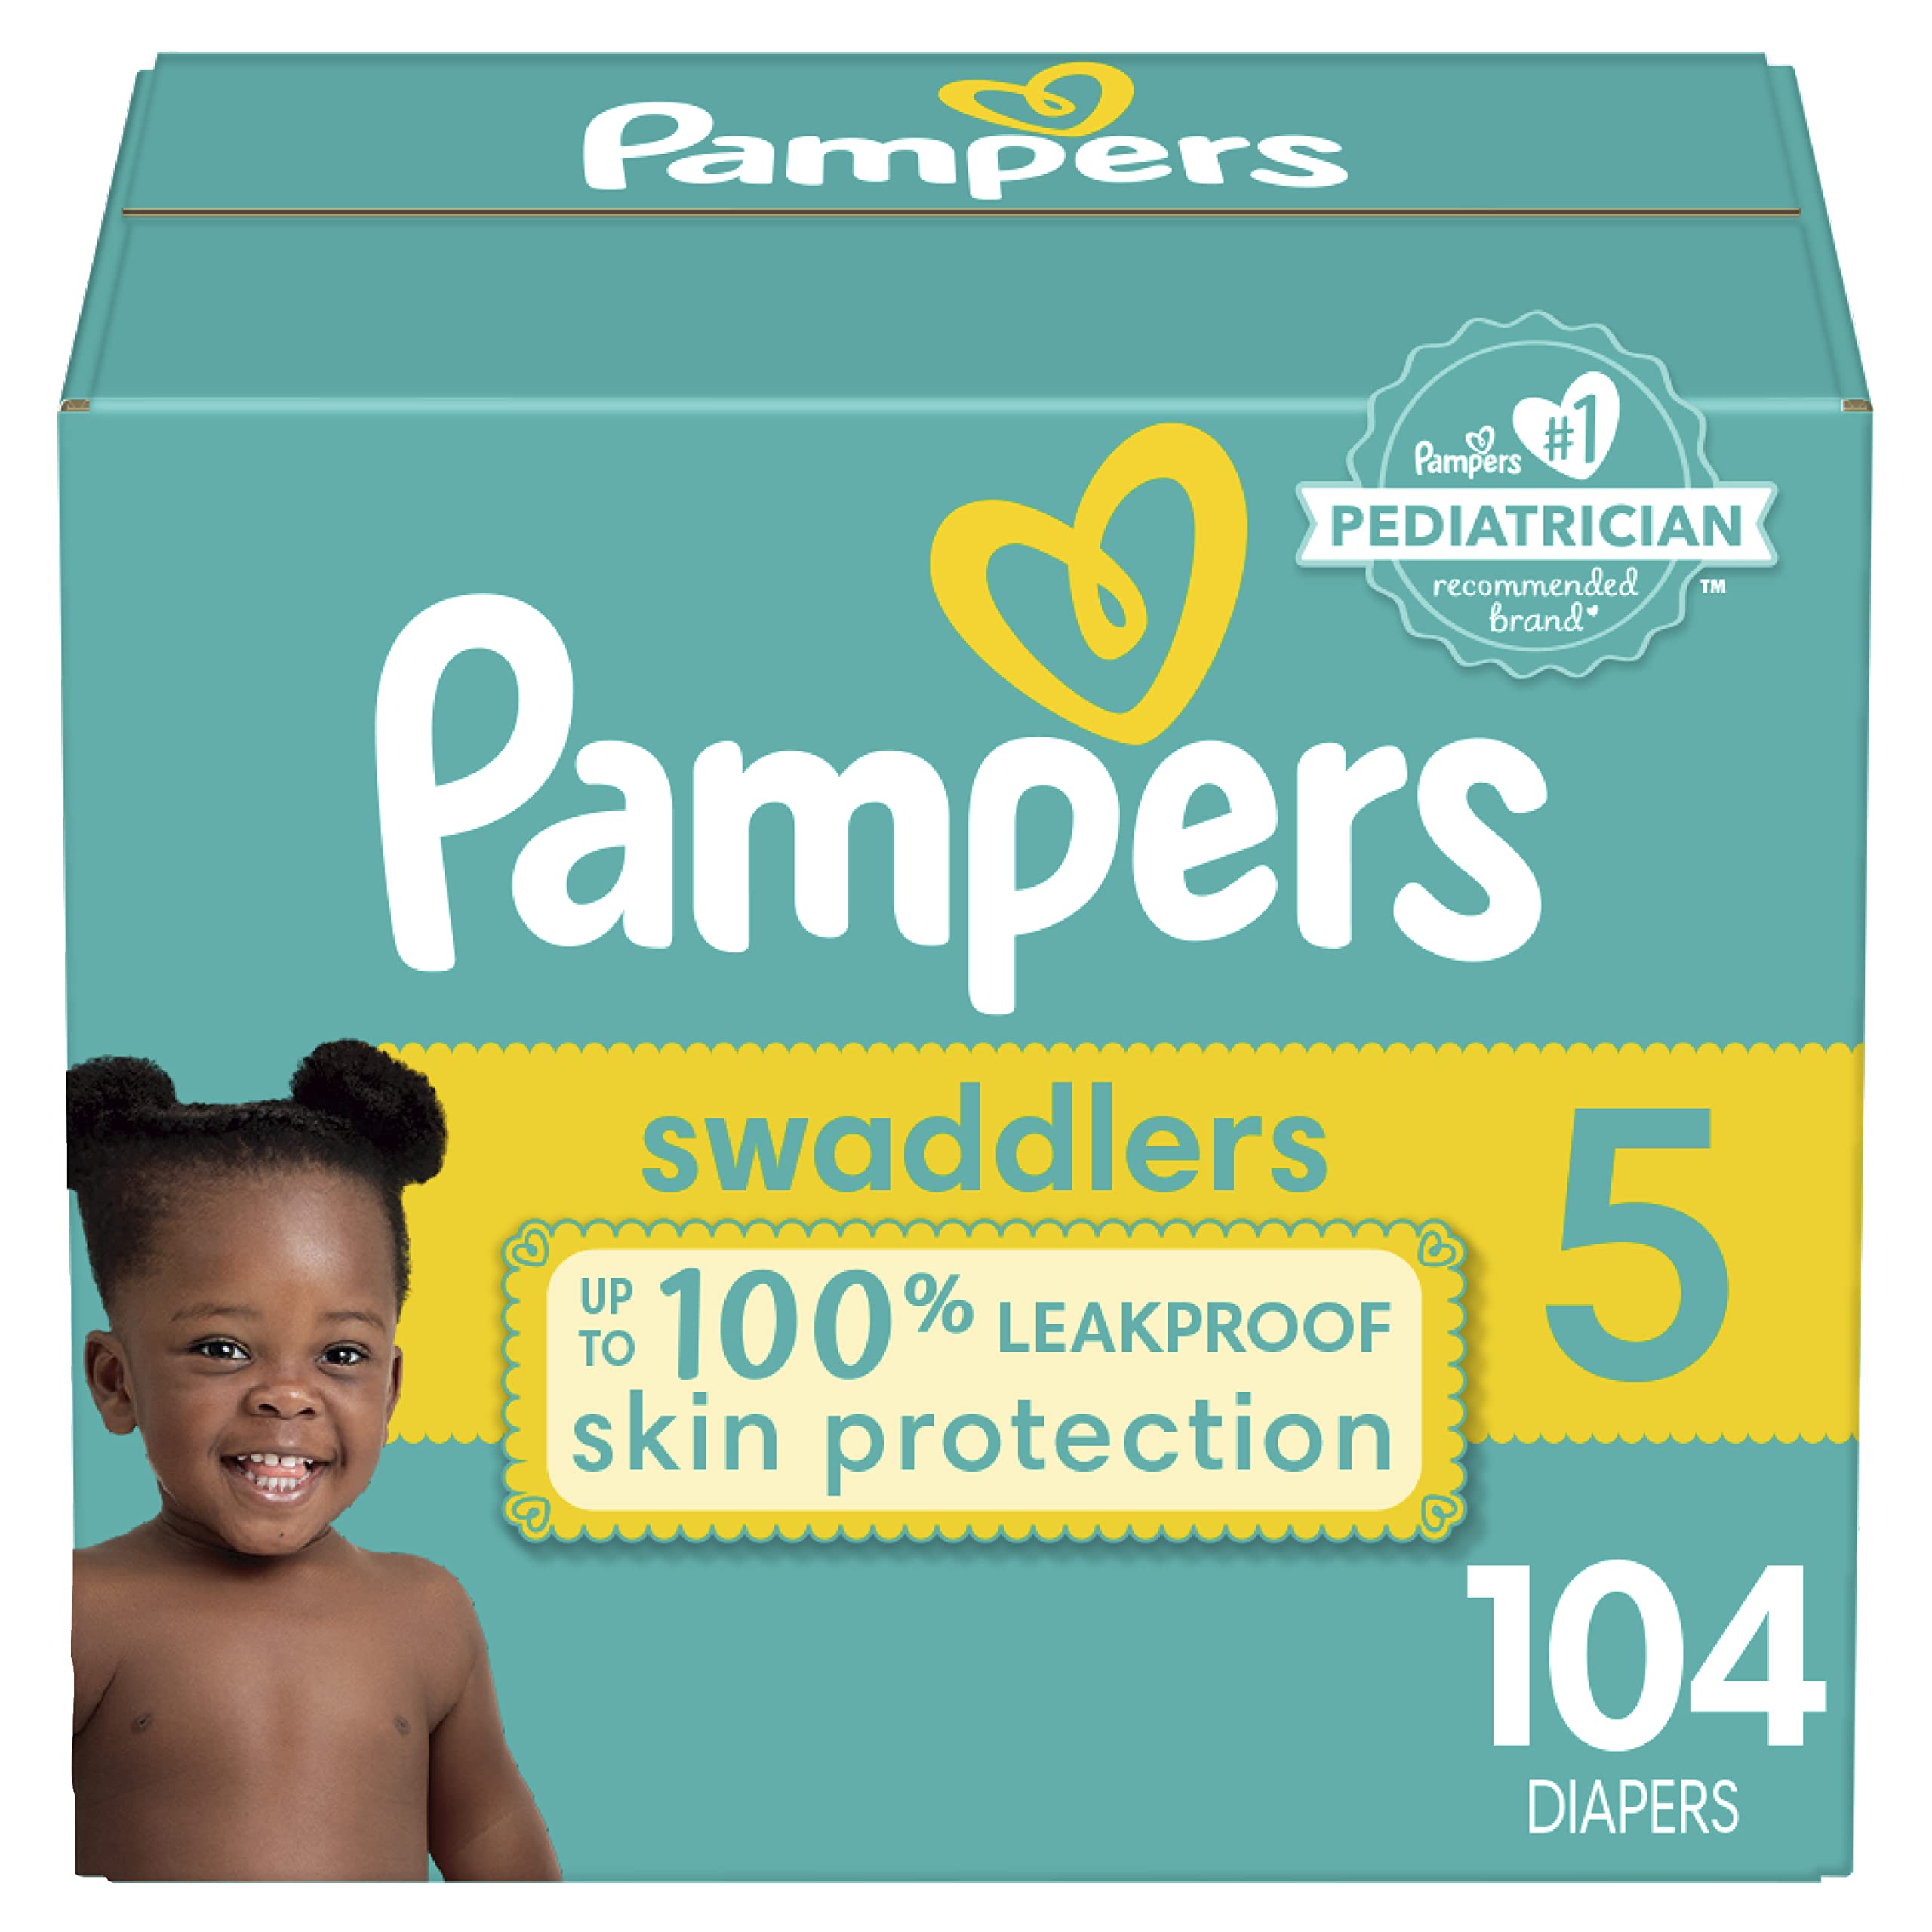 pampers 3 cana